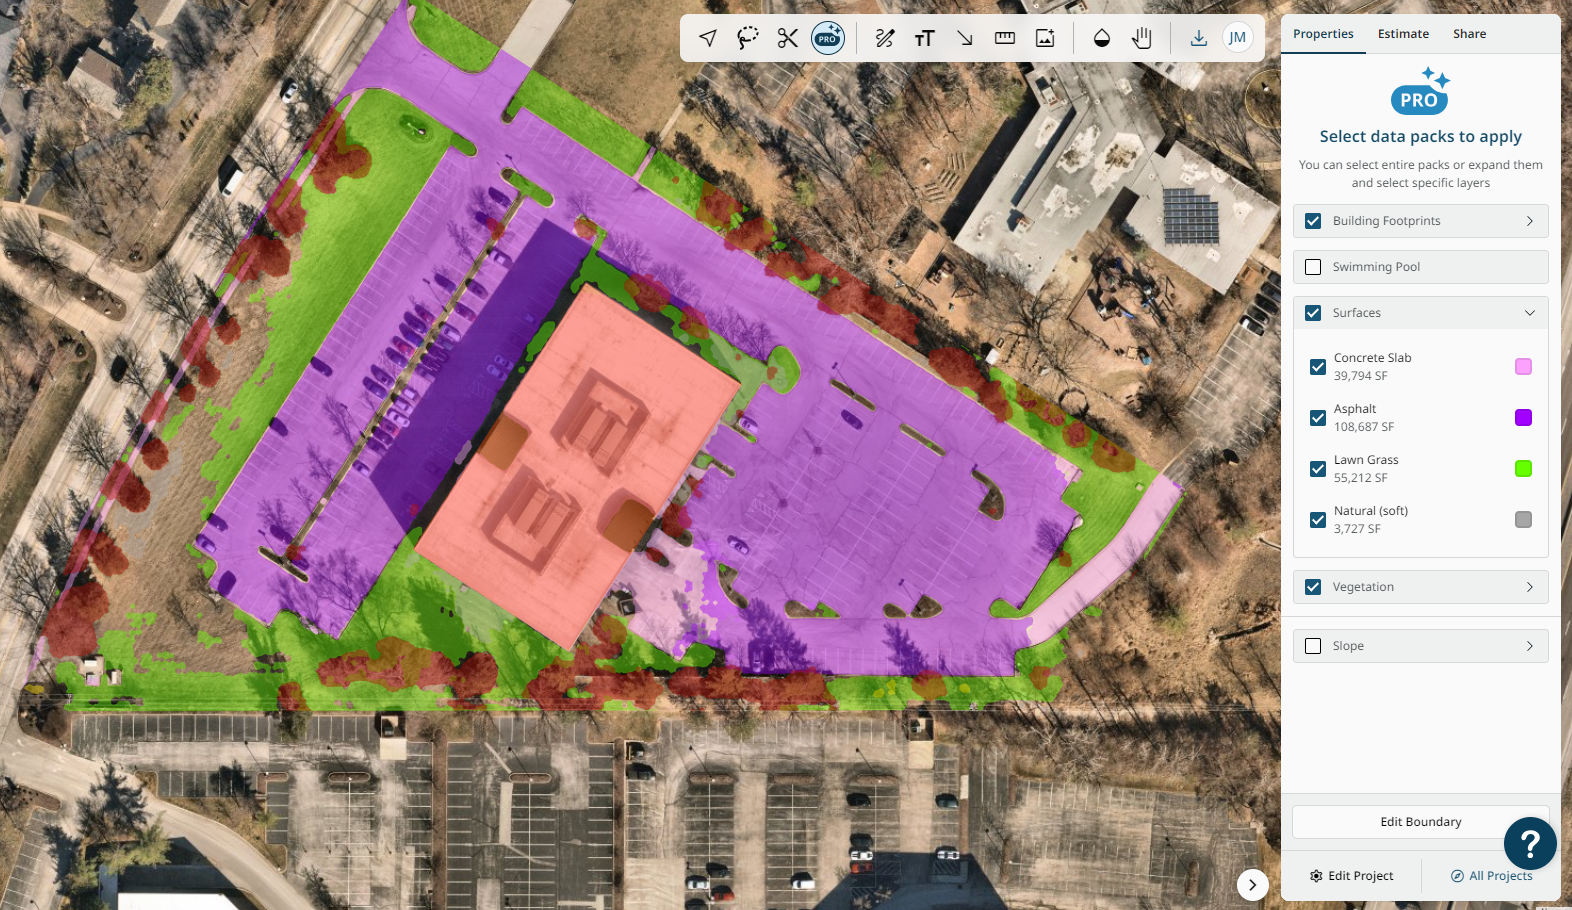 How landscapers harness the power of artificial intelligence with PropertyIntel's ProMaps